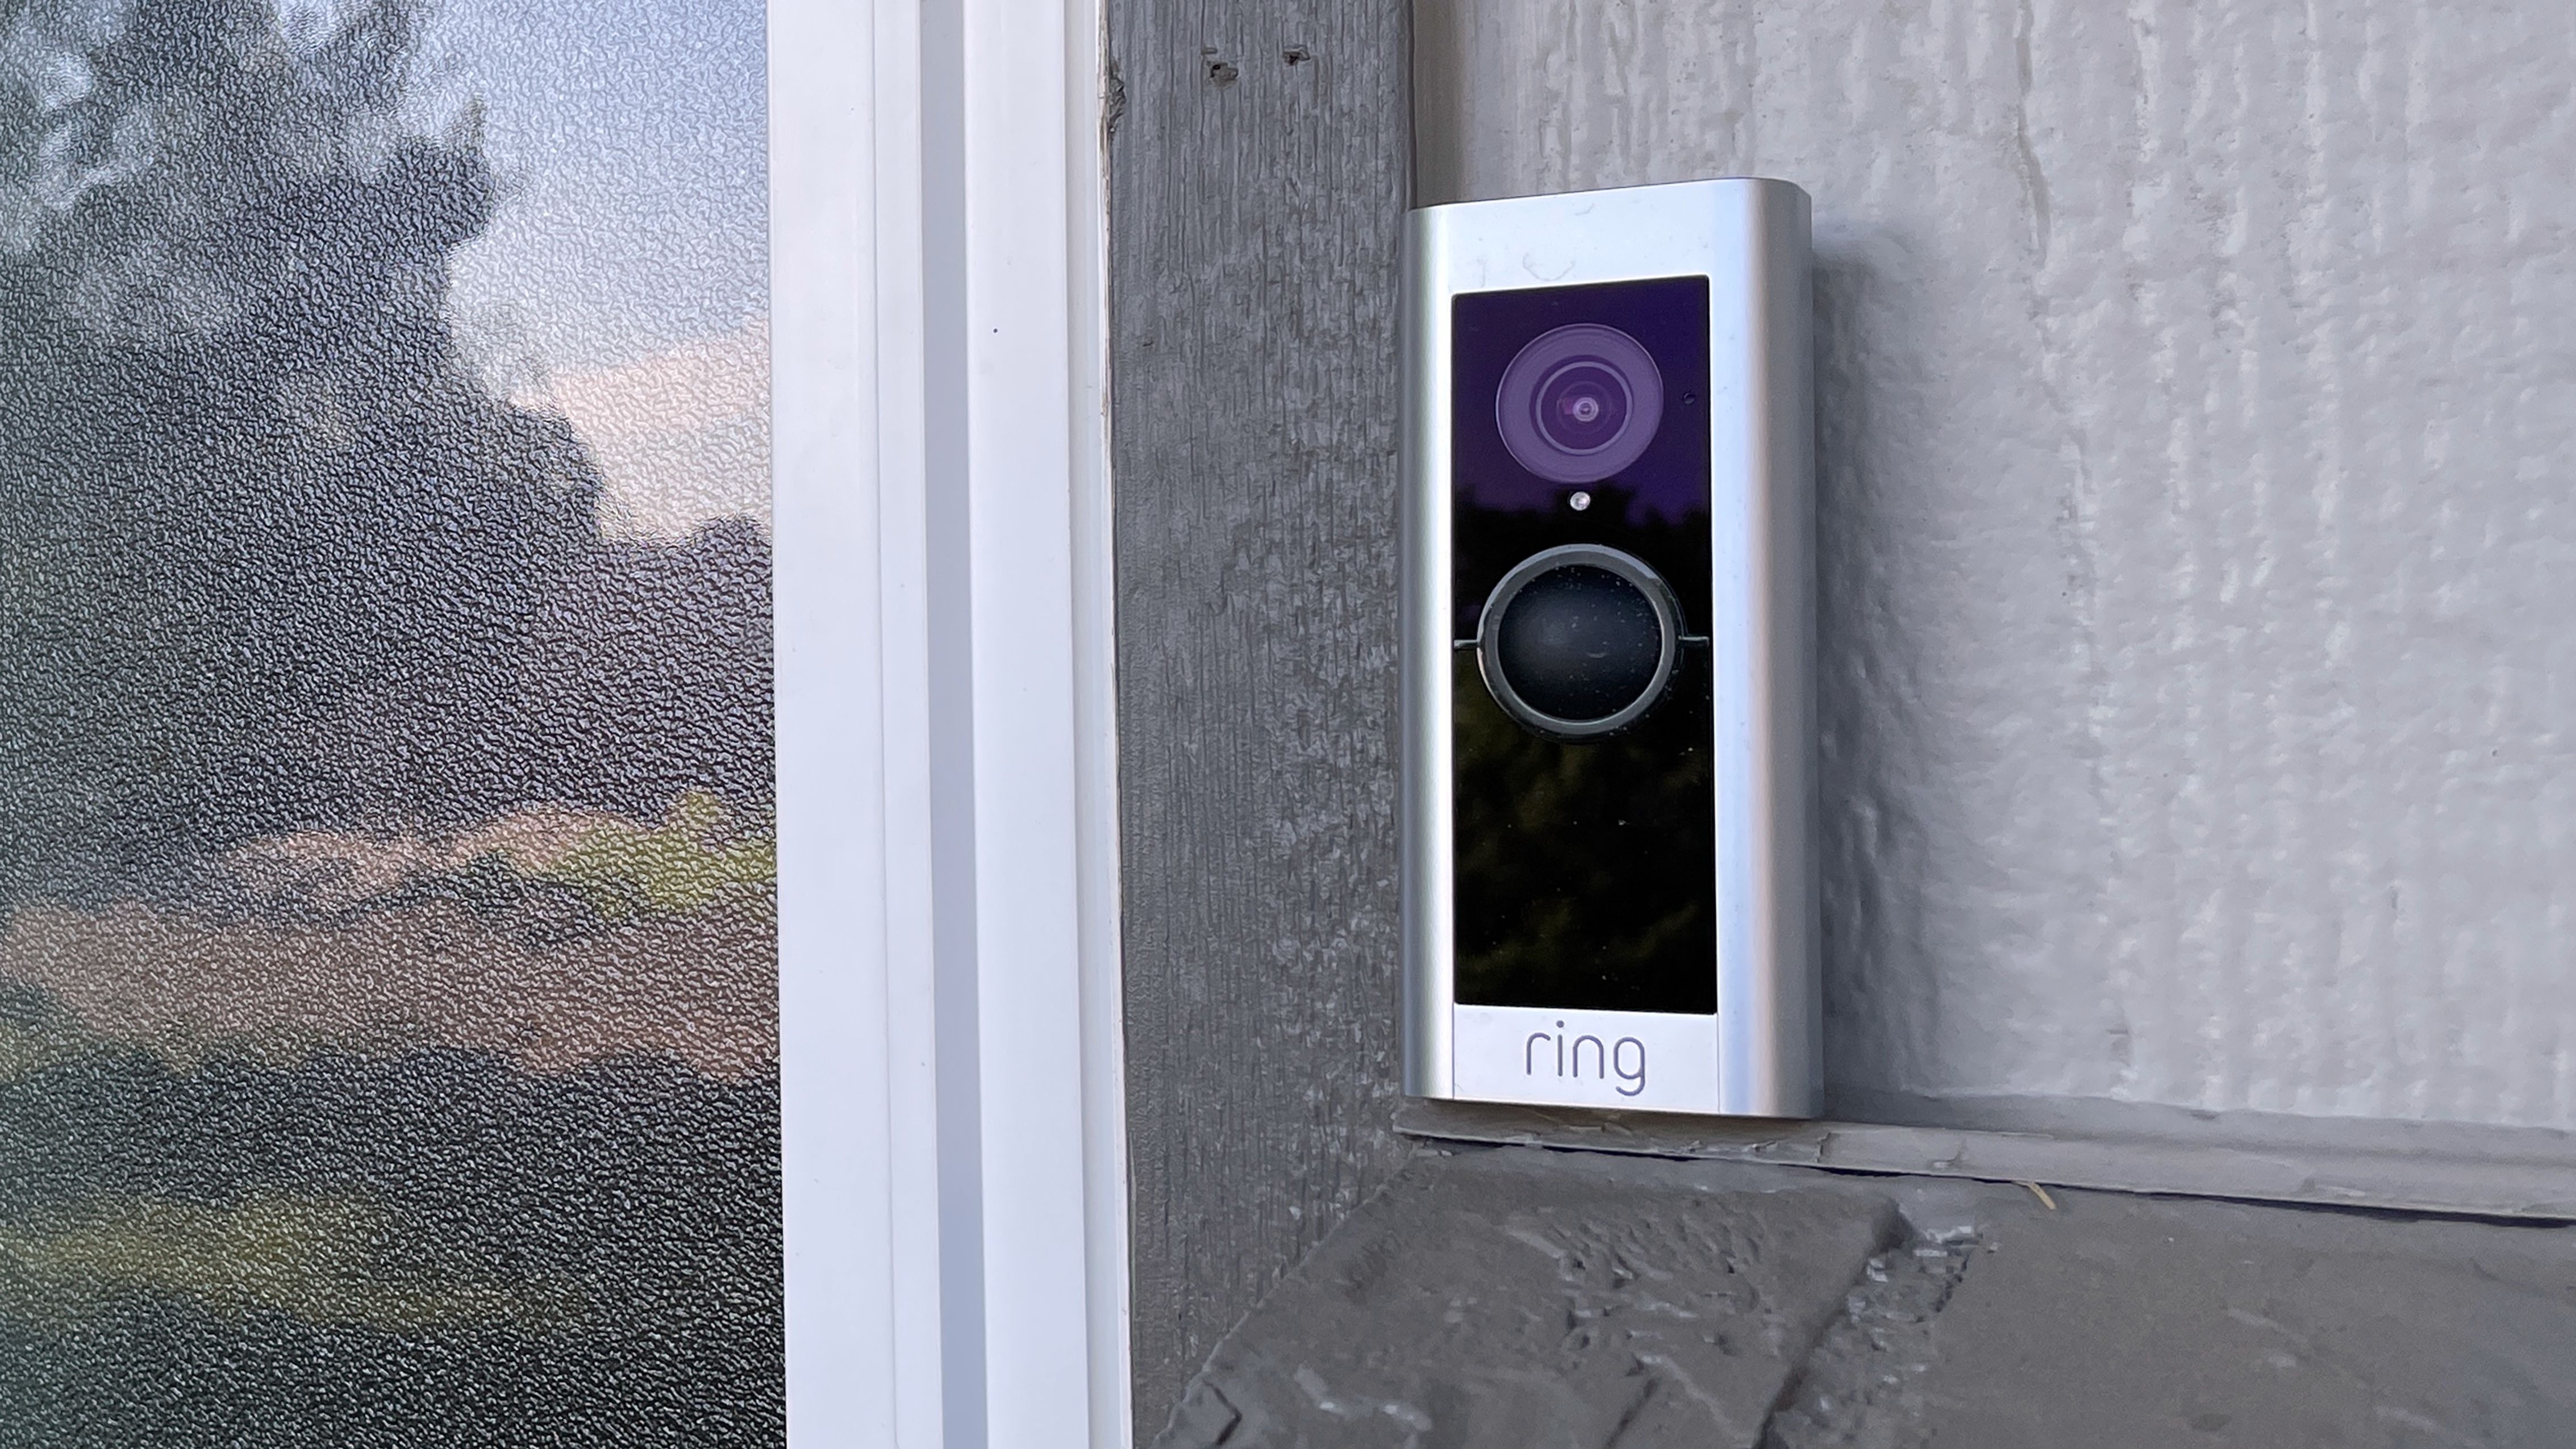 This no-fee video doorbell can guard your packages this holiday